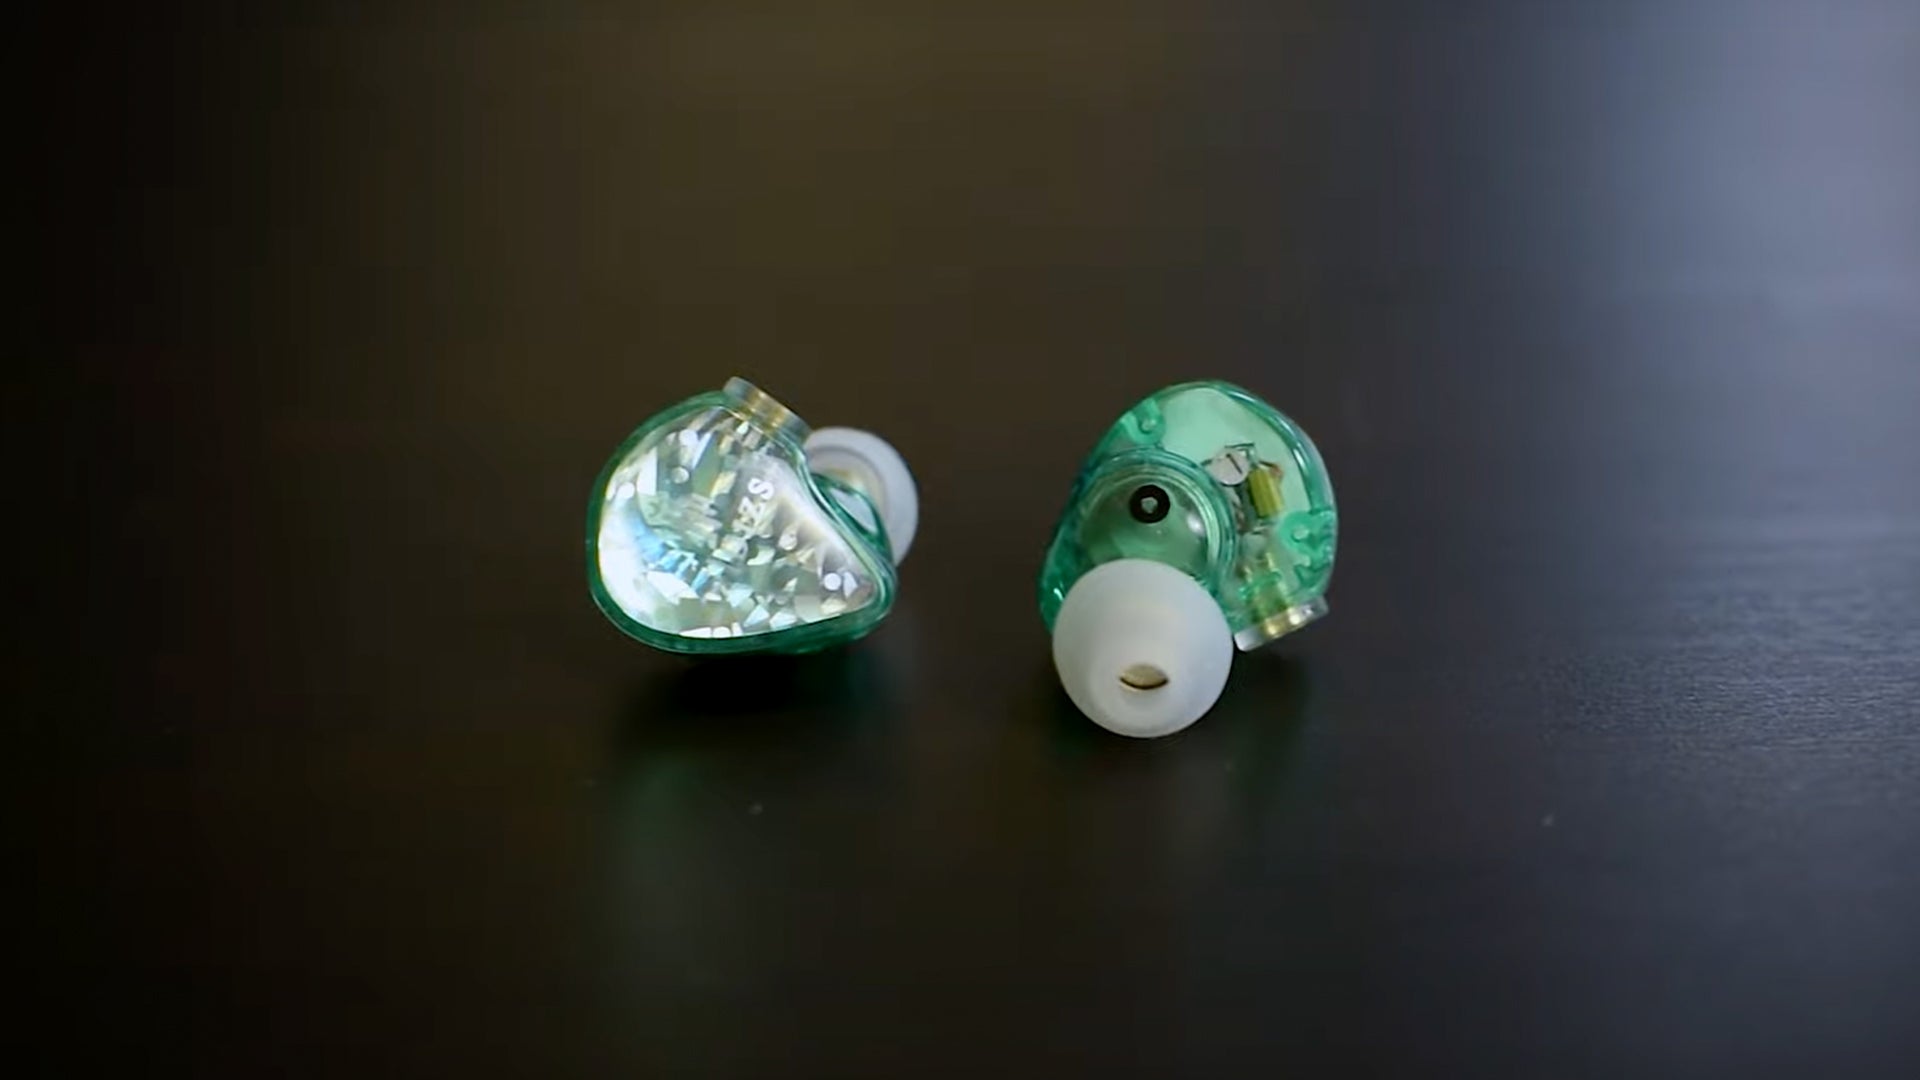 Hidizs MS2 In-Ear Review - So good!